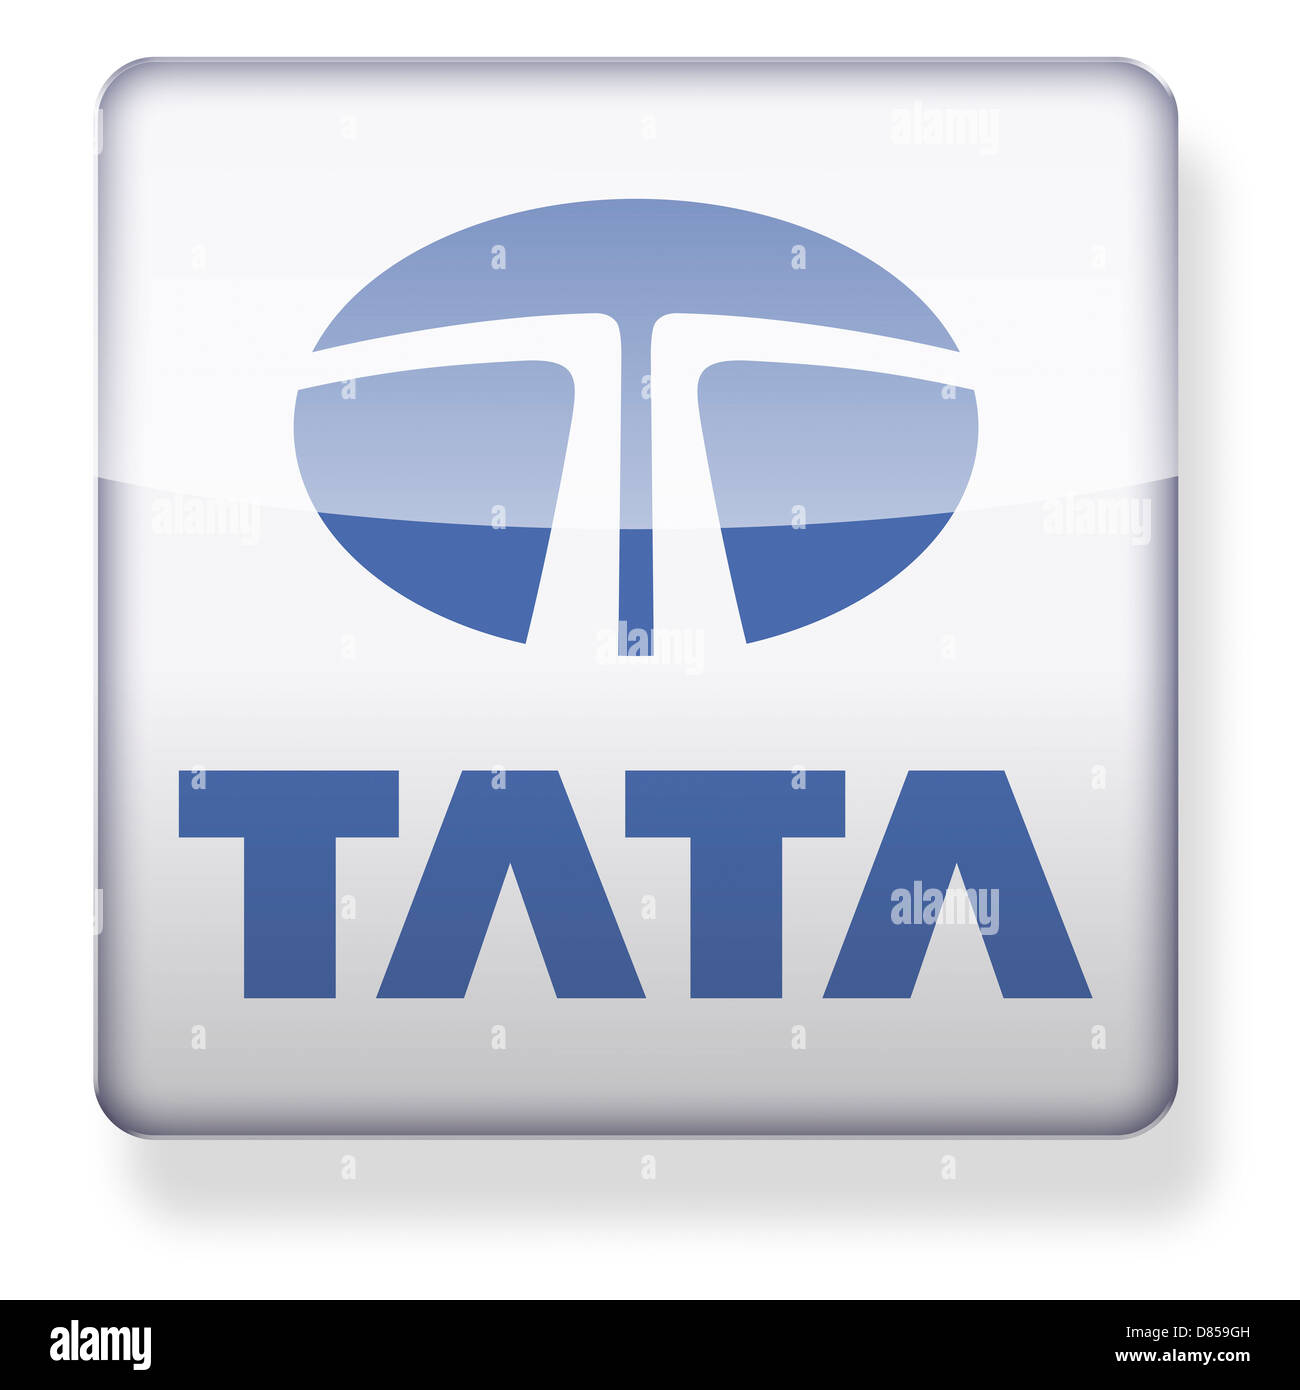 Tata logo as an app icon. Clipping path included. Stock Photo